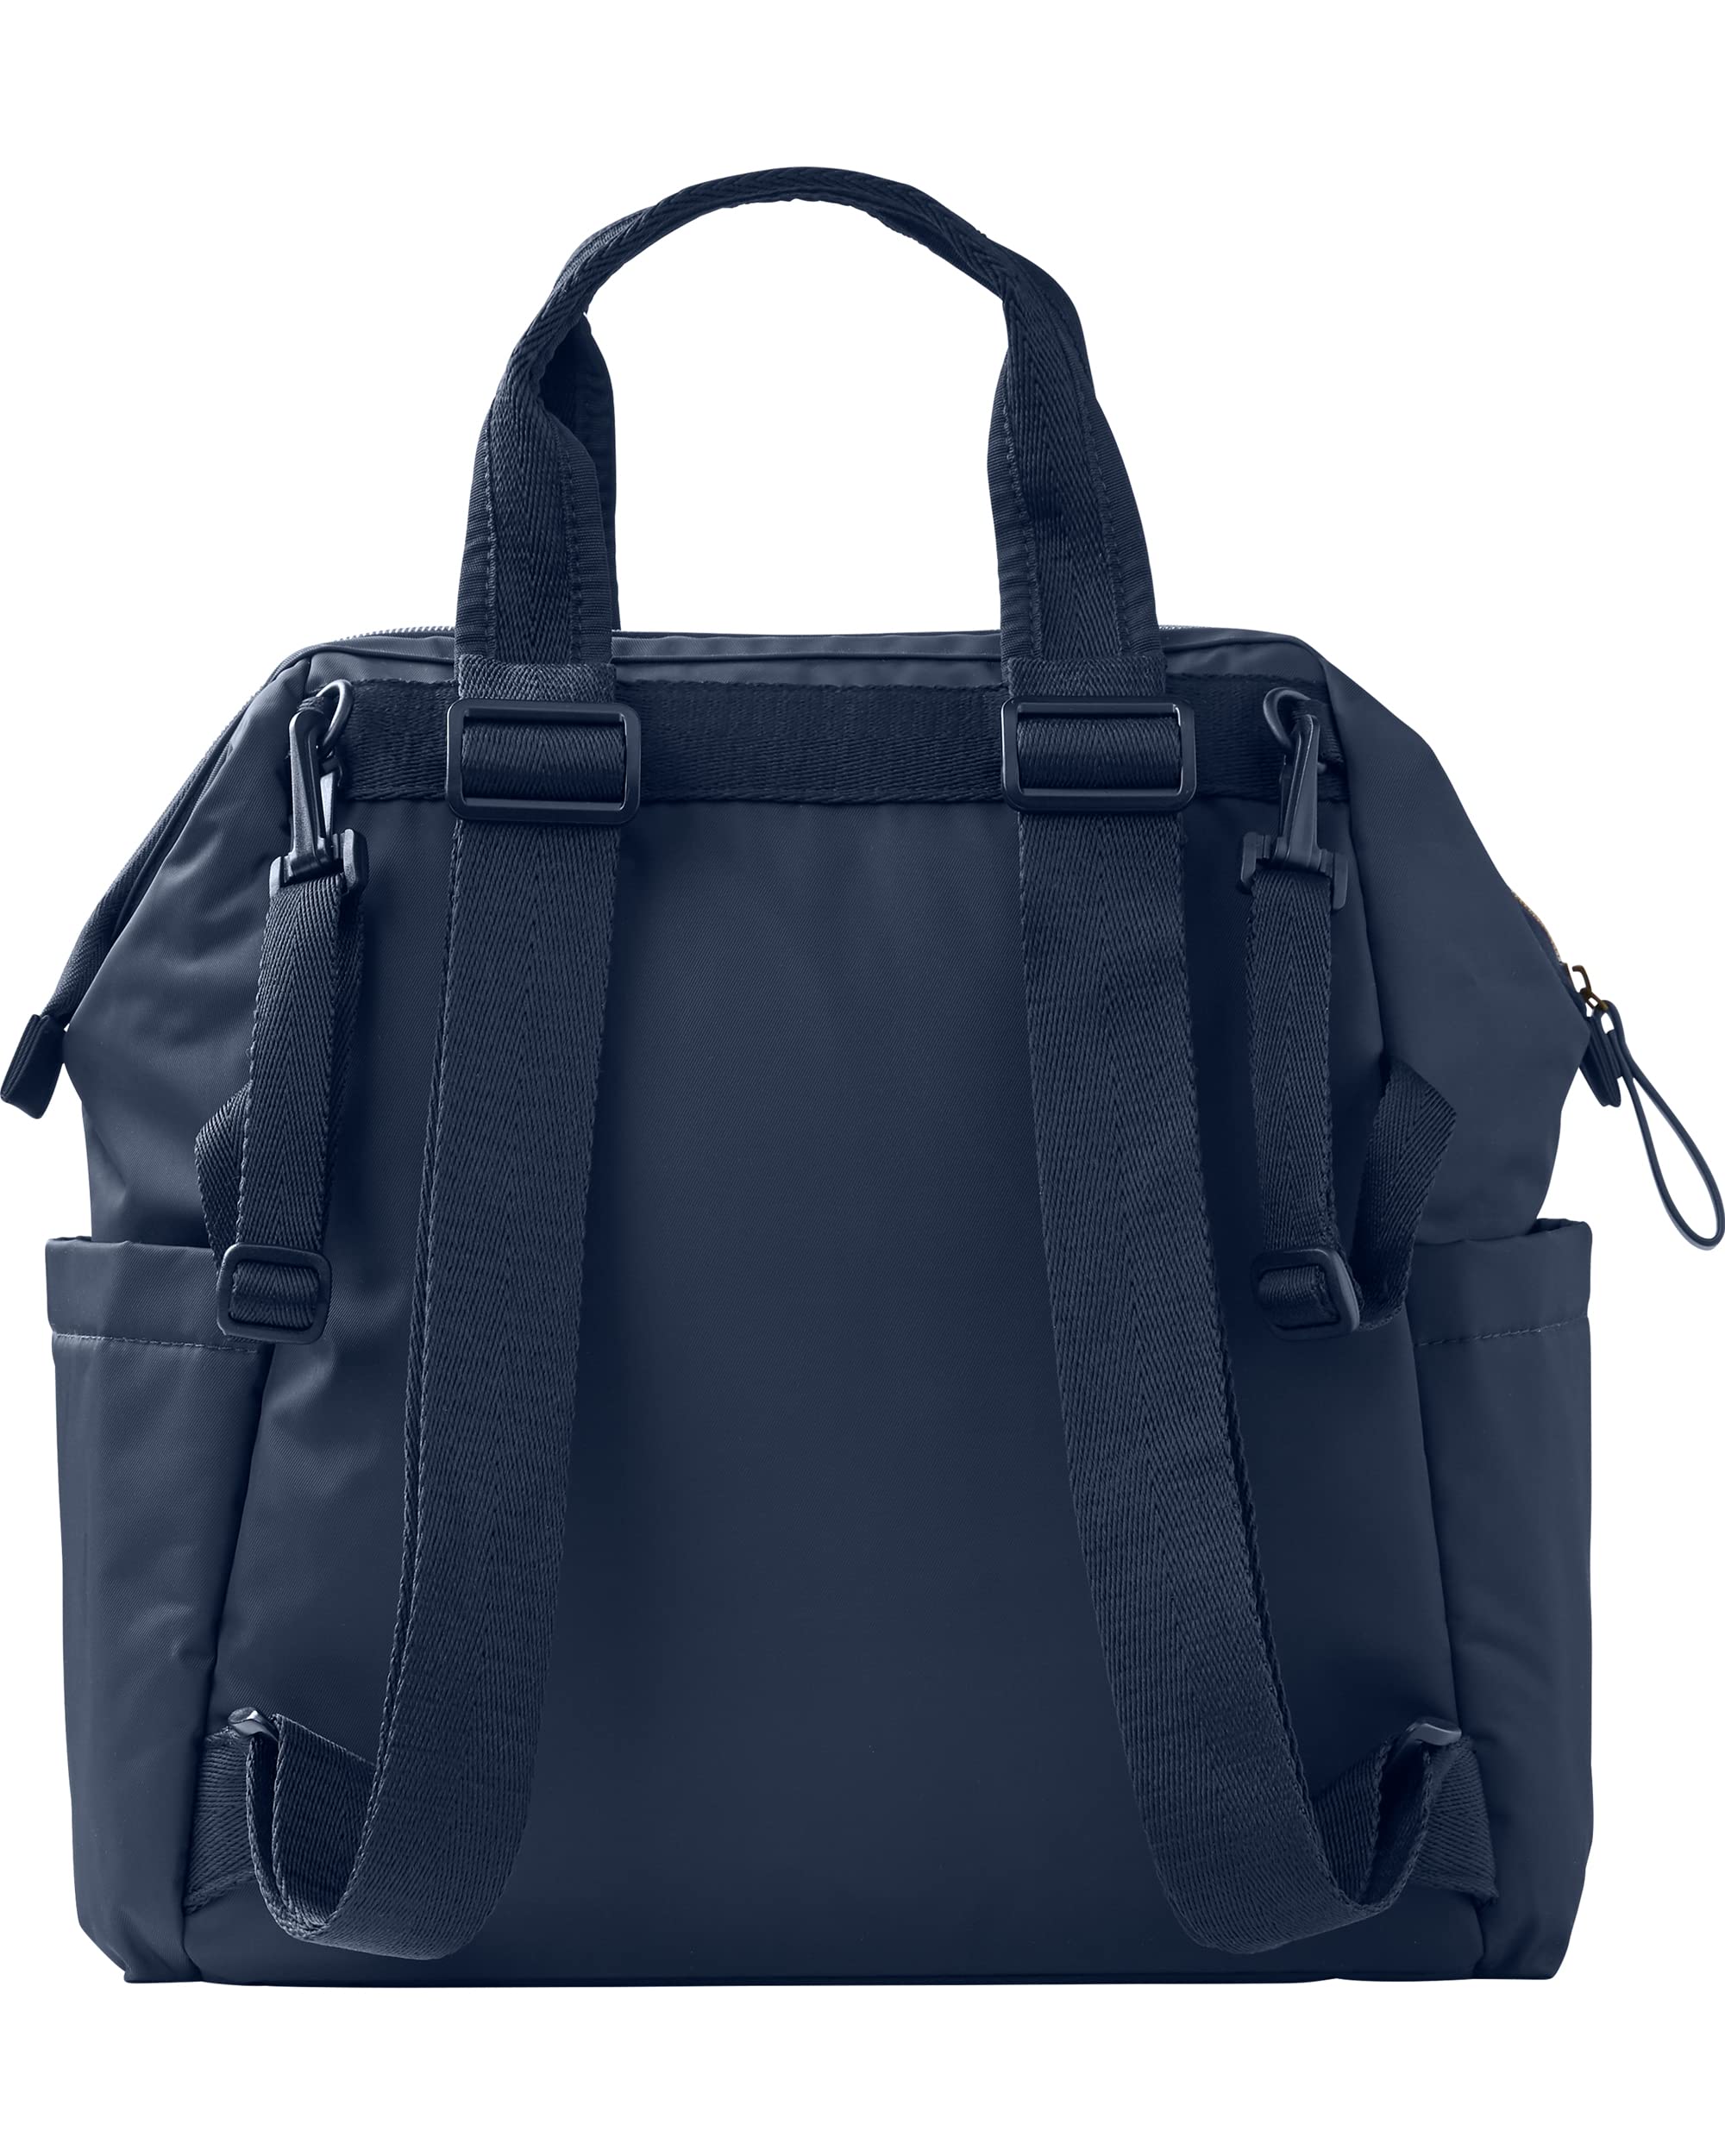 Skip Hop Diaper Bag Backpack: Mainframe Large Capacity Wide Open Structure with Changing Pad & Stroller Attachement, Midnight Navy